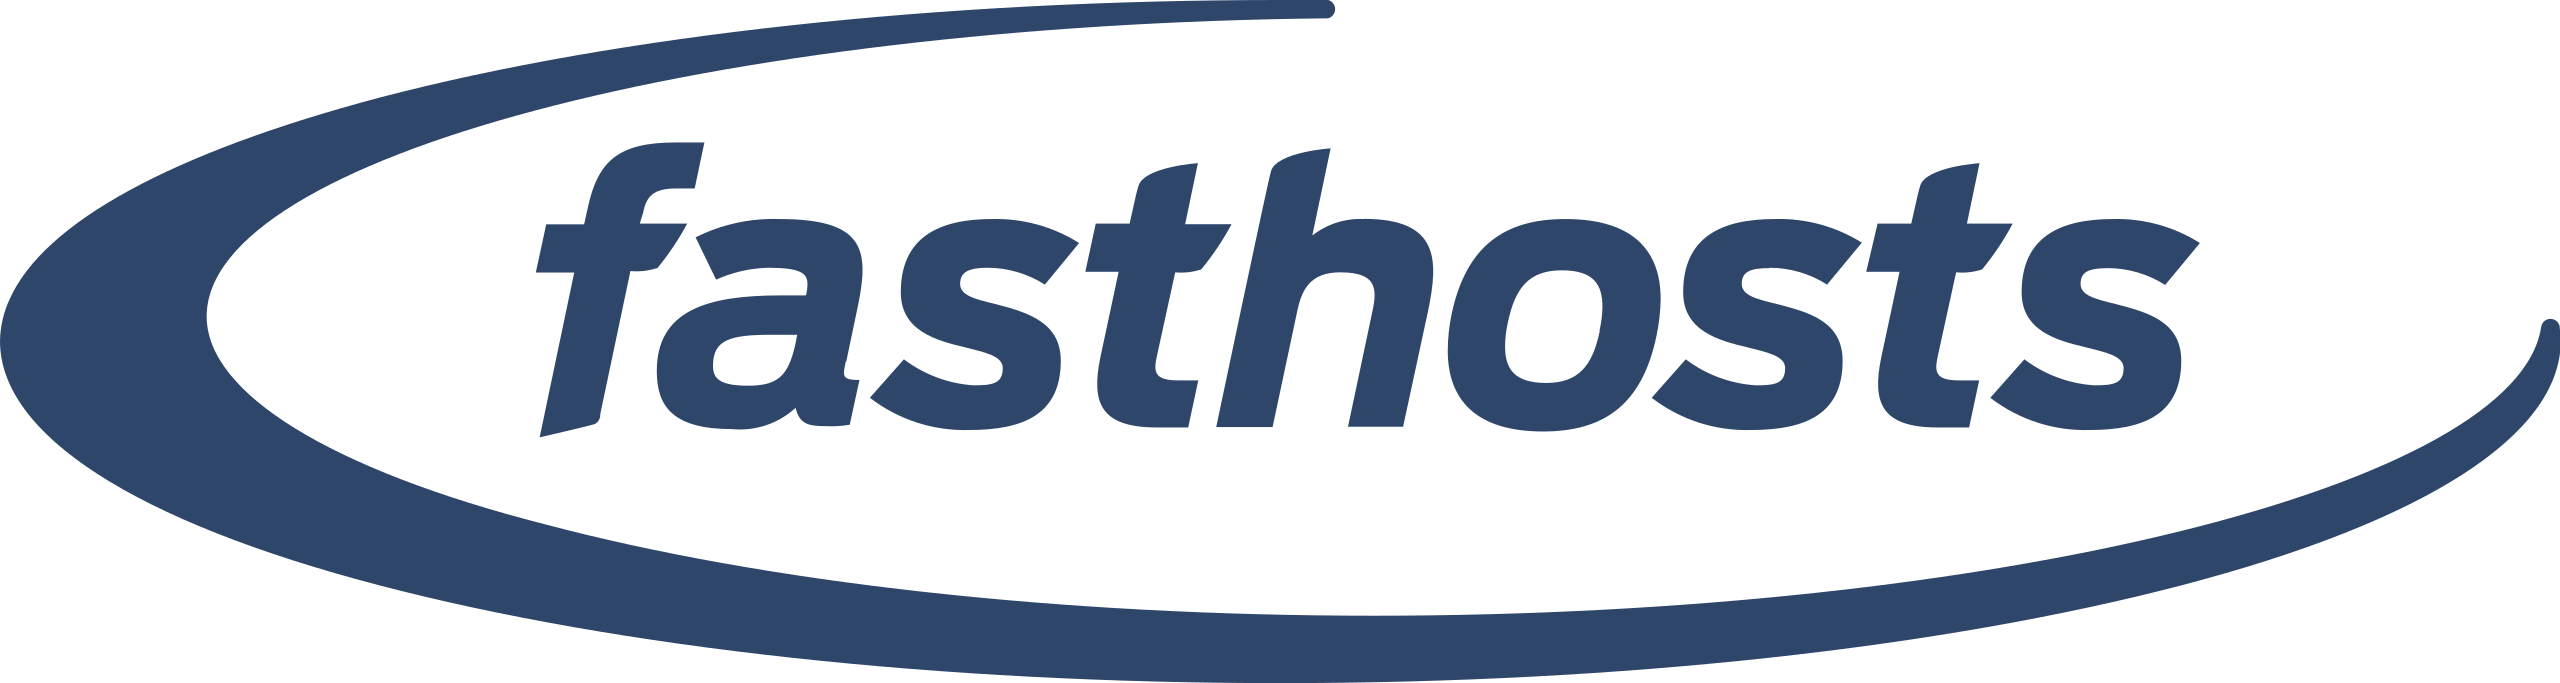 File:Fasthosts-logo.svg - Wikimedia Commons